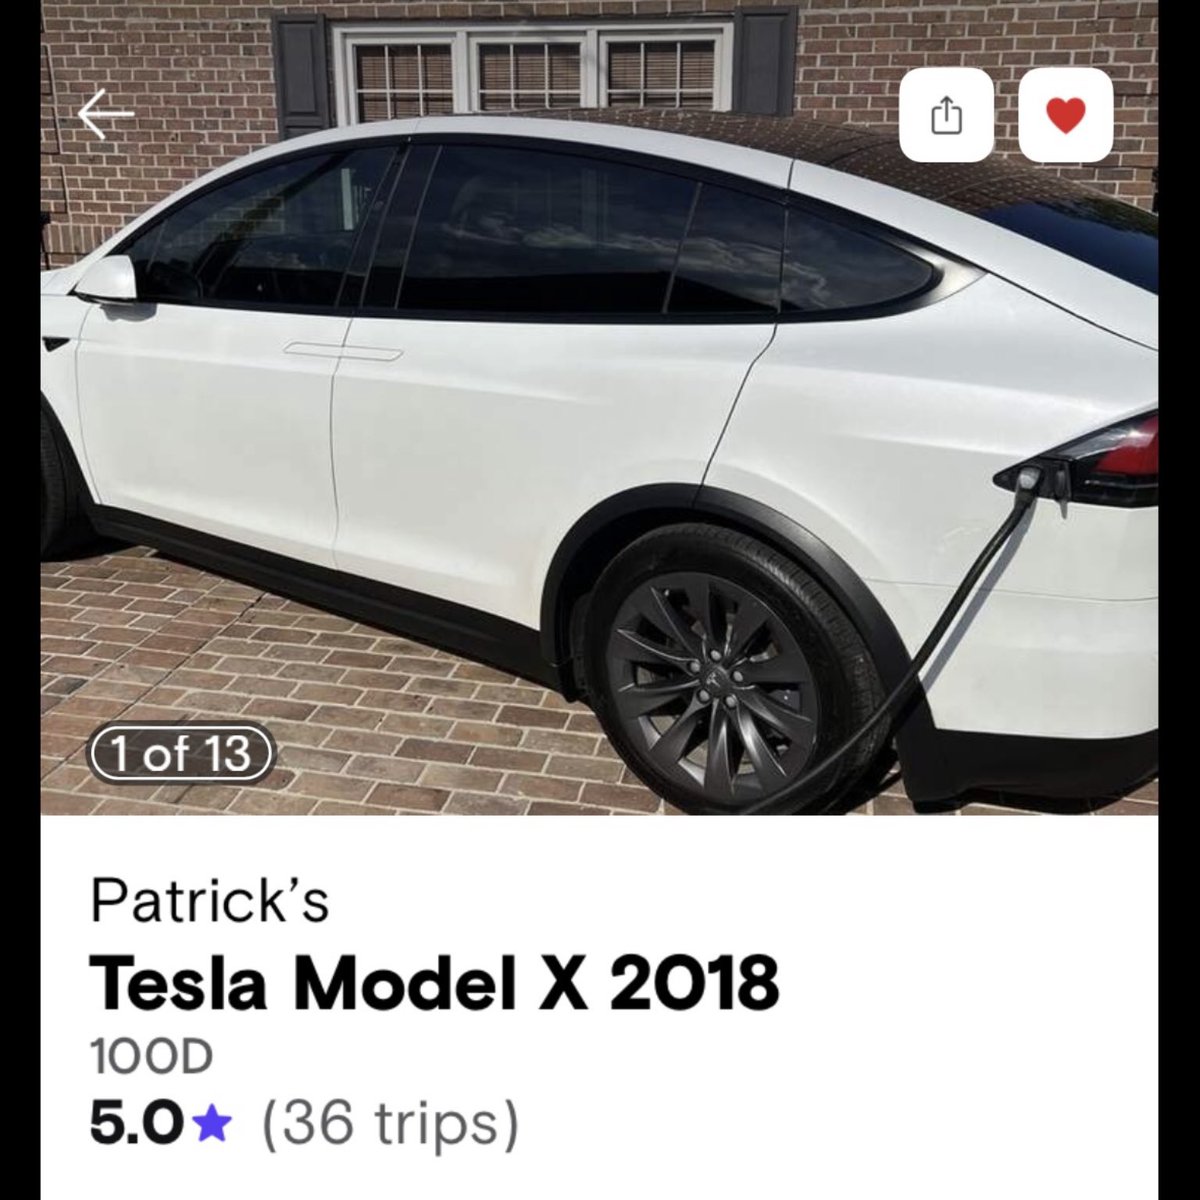 Hey #NEOhio … you can now rent the Fabergé Egg of cars as @elonmusk calls the Model X $TSLA 

The team at FastCharge Energy™ is excited to share this beauty.
Thx Patrick. Two Days up to Two Weeks. Now thru June 30th.

spreaker.com/episode/episod… 
Pick it up in #NewPhilaO or #CAK